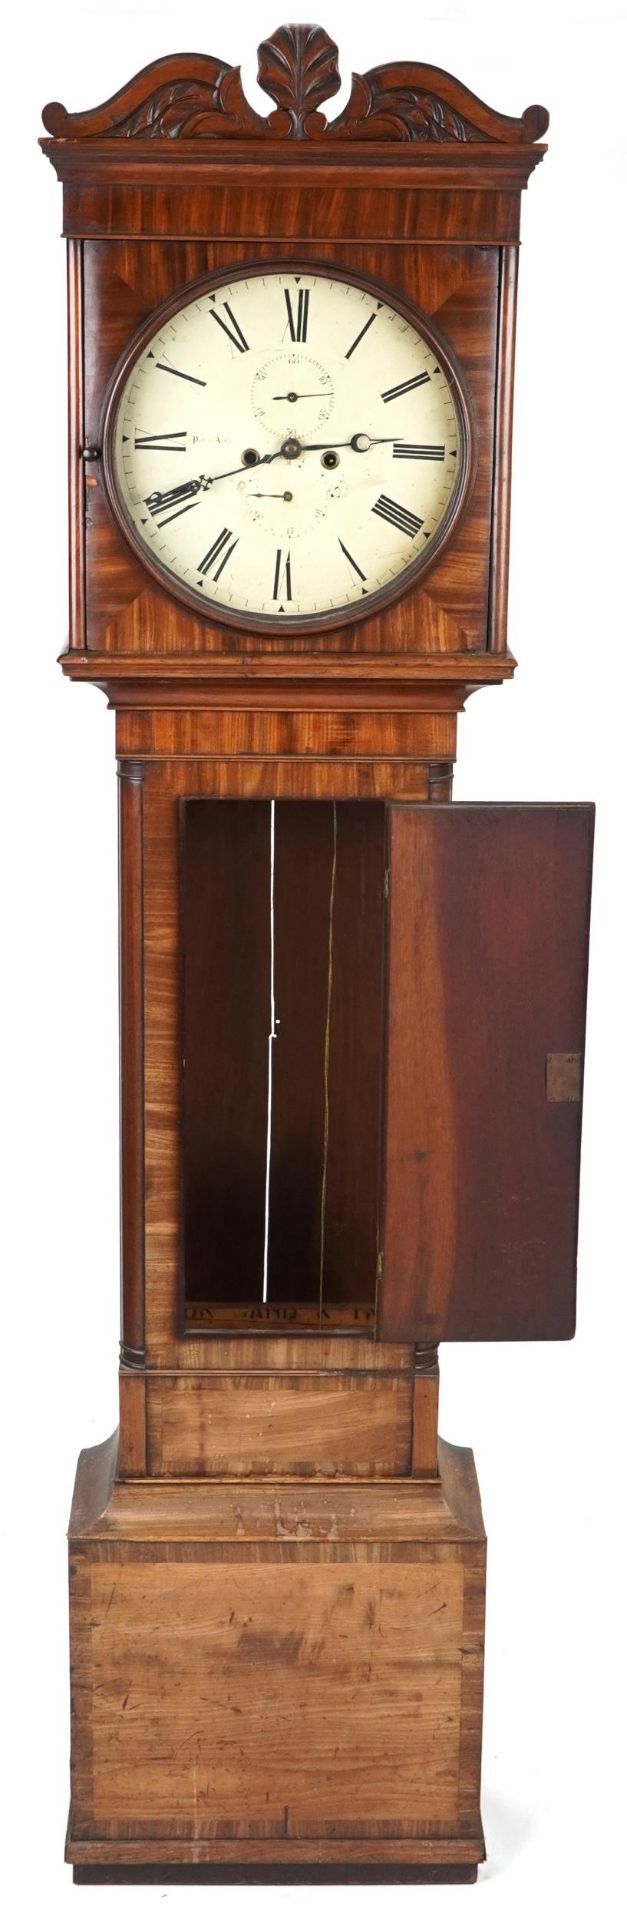 Antique mahogany grandfather clock with painted dial having Roman numerals and two subsidiary dials, - Image 2 of 4